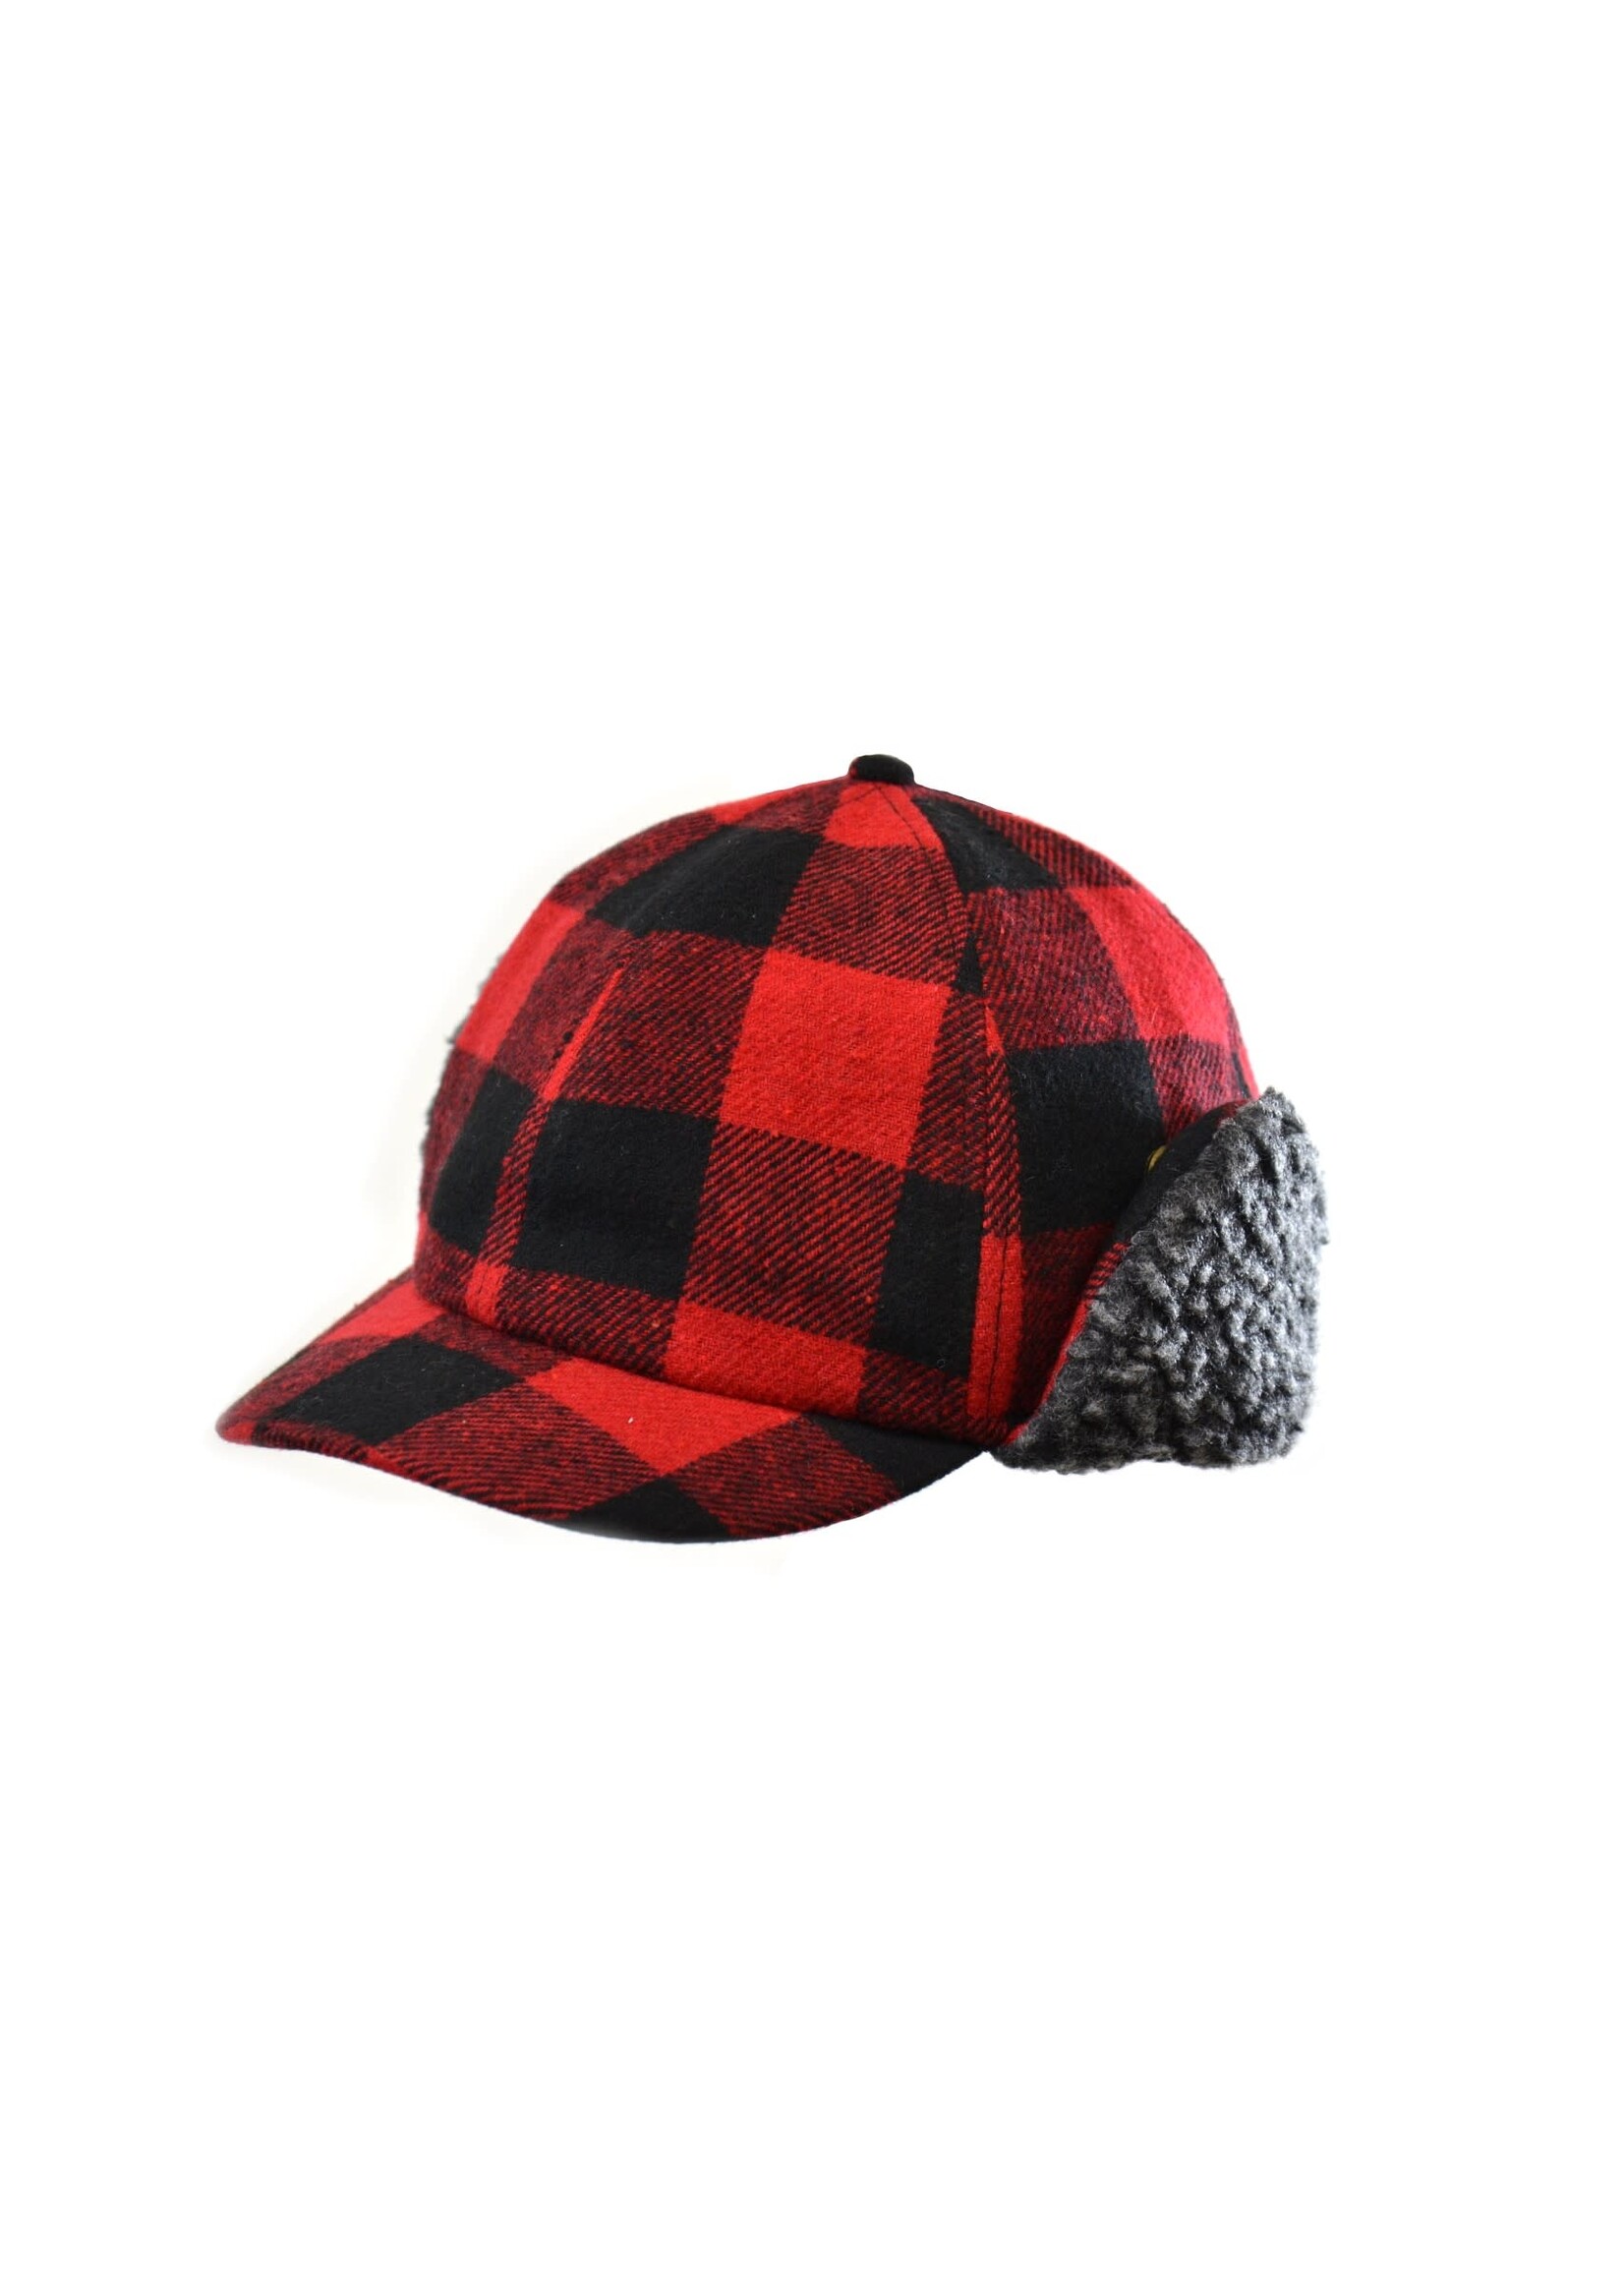 Crown Cap Buffalo Check With Earflaps -